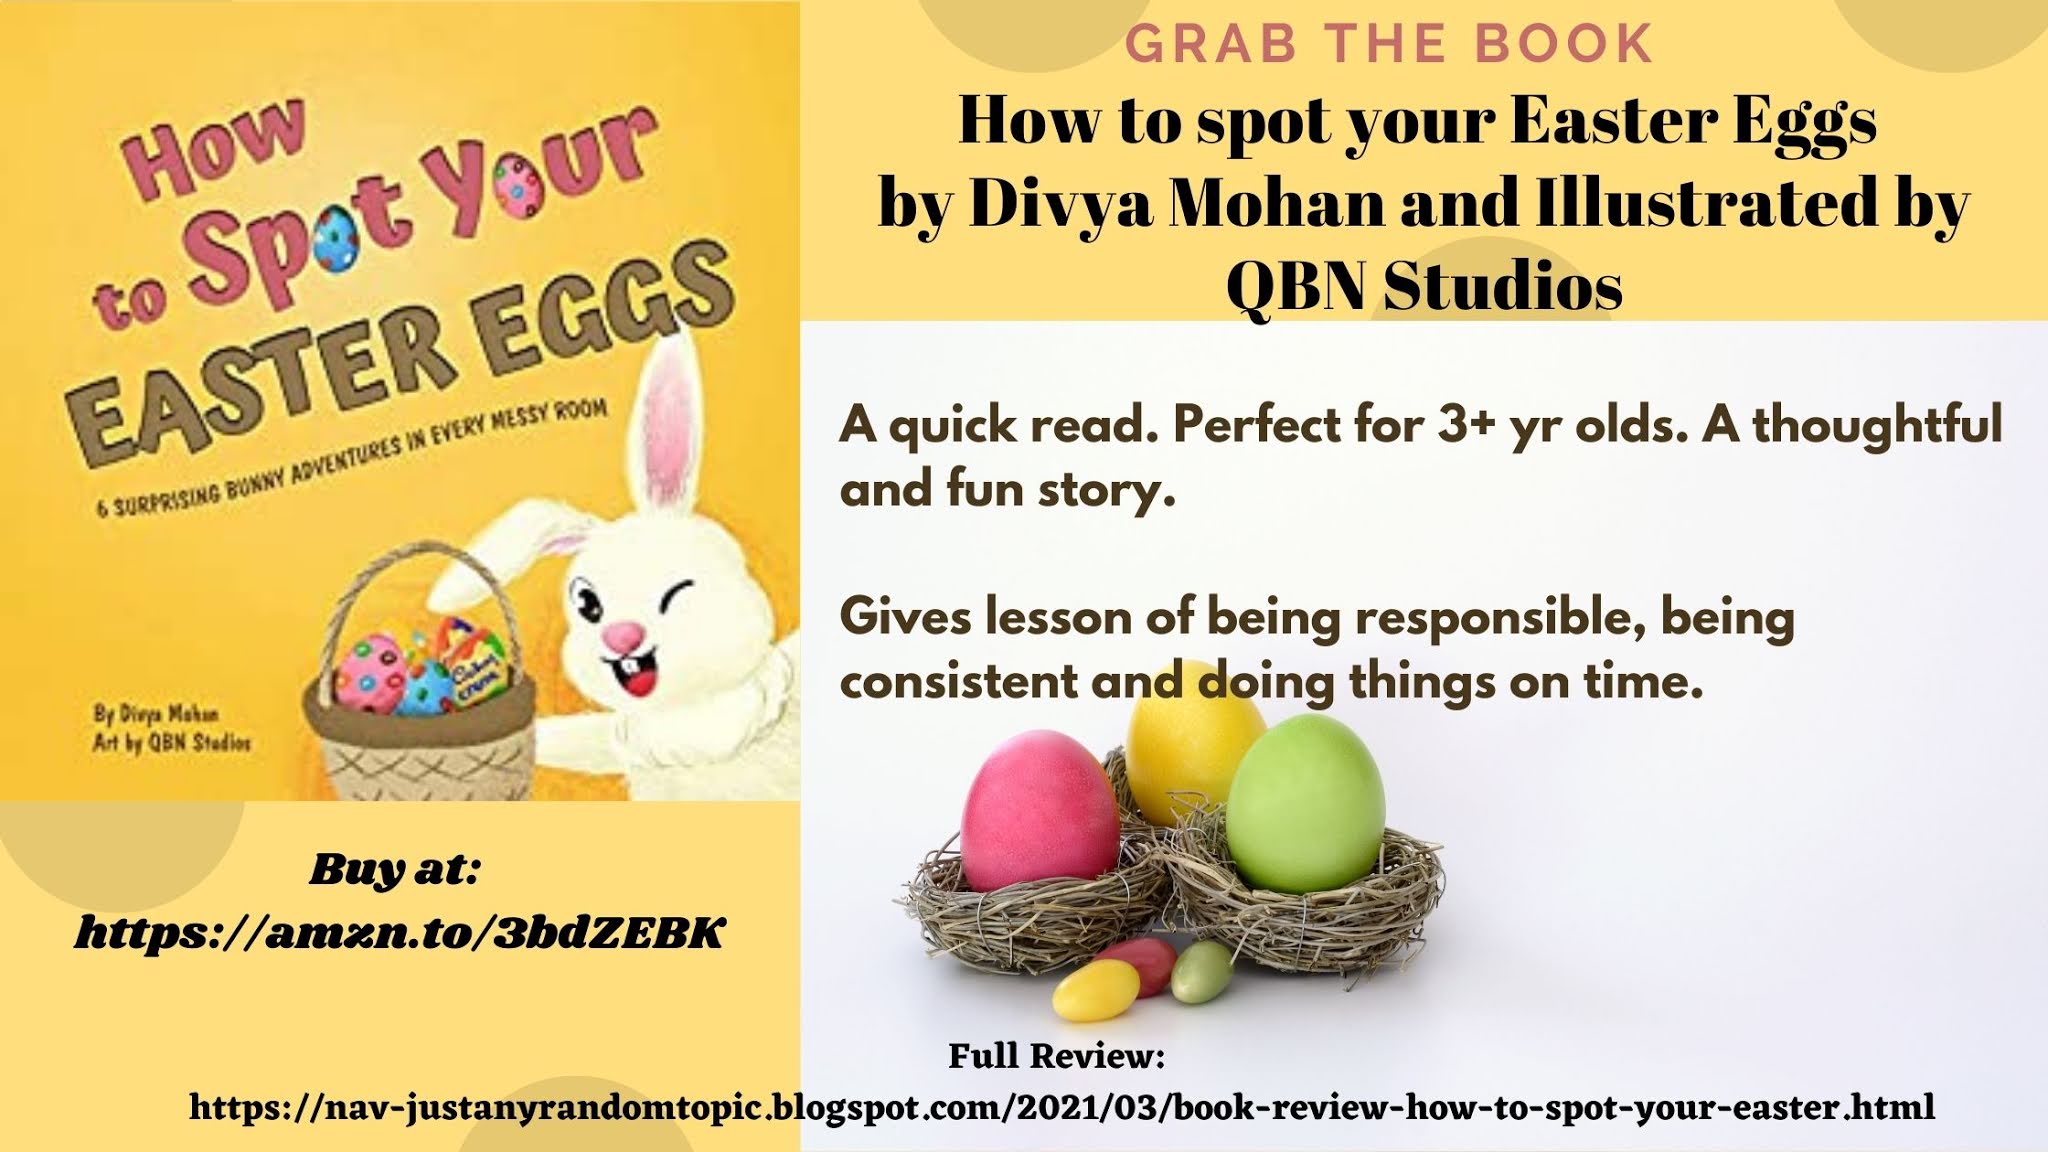 Book Review: How to spot your Easter Eggs by Divya Mohan and Illustrated by QBN Studios